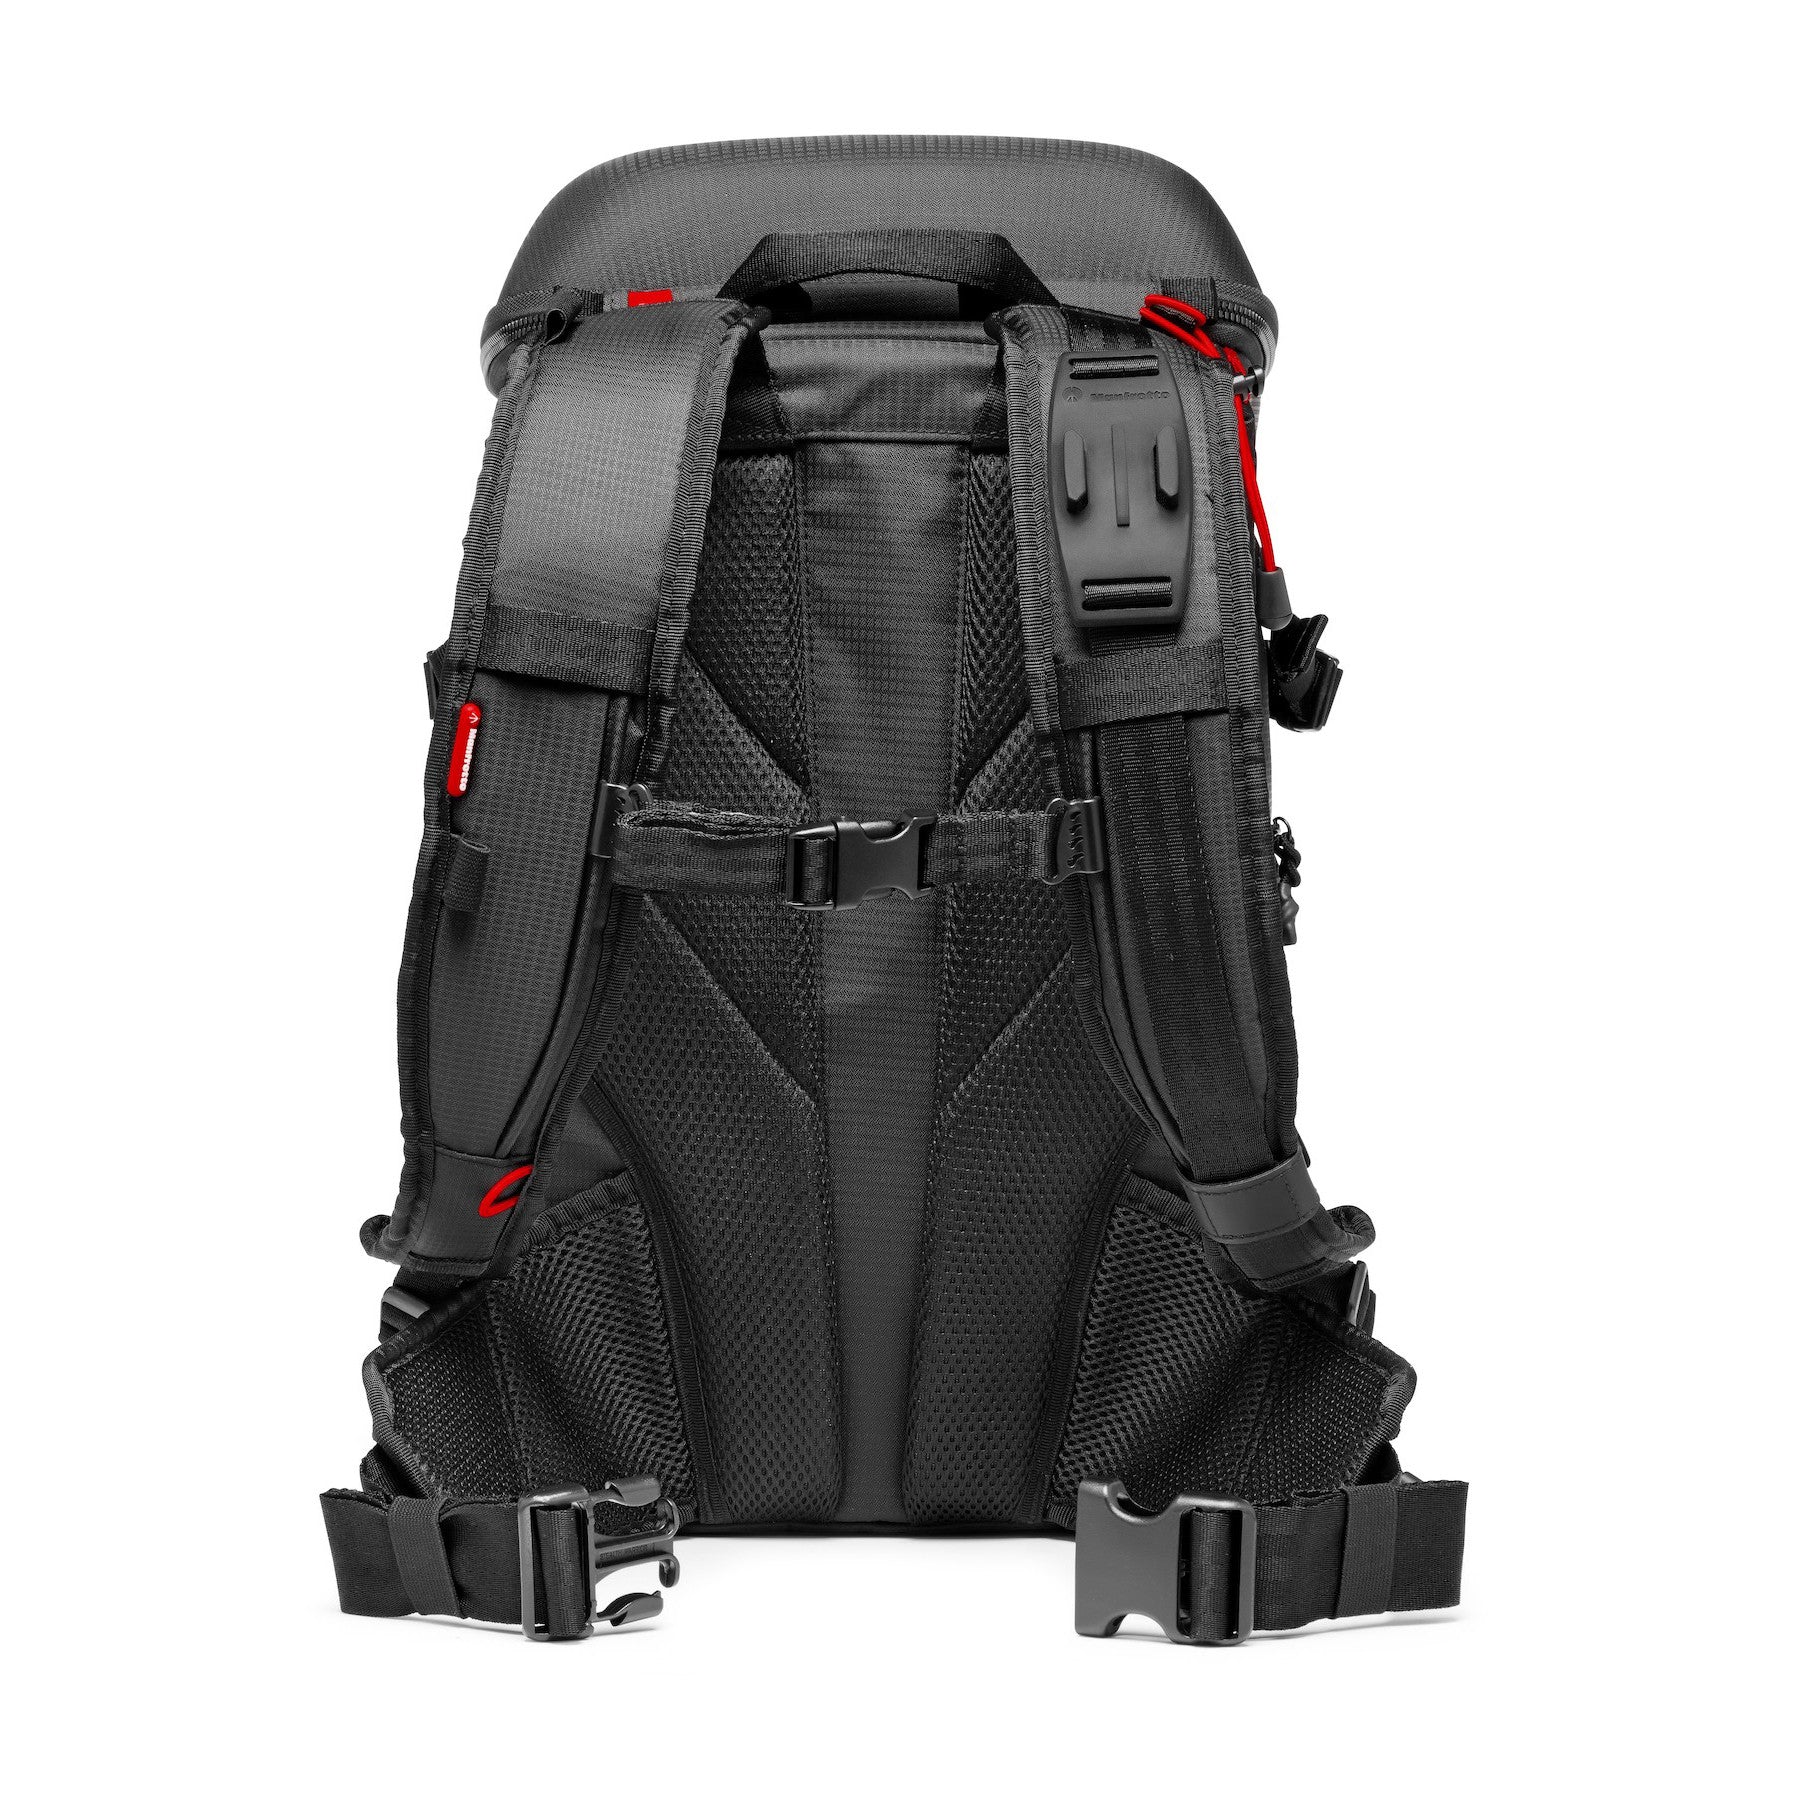 Manfrotto Off Road Stunt Backpack (Black), bags backpacks, Manfrotto - Pictureline  - 2